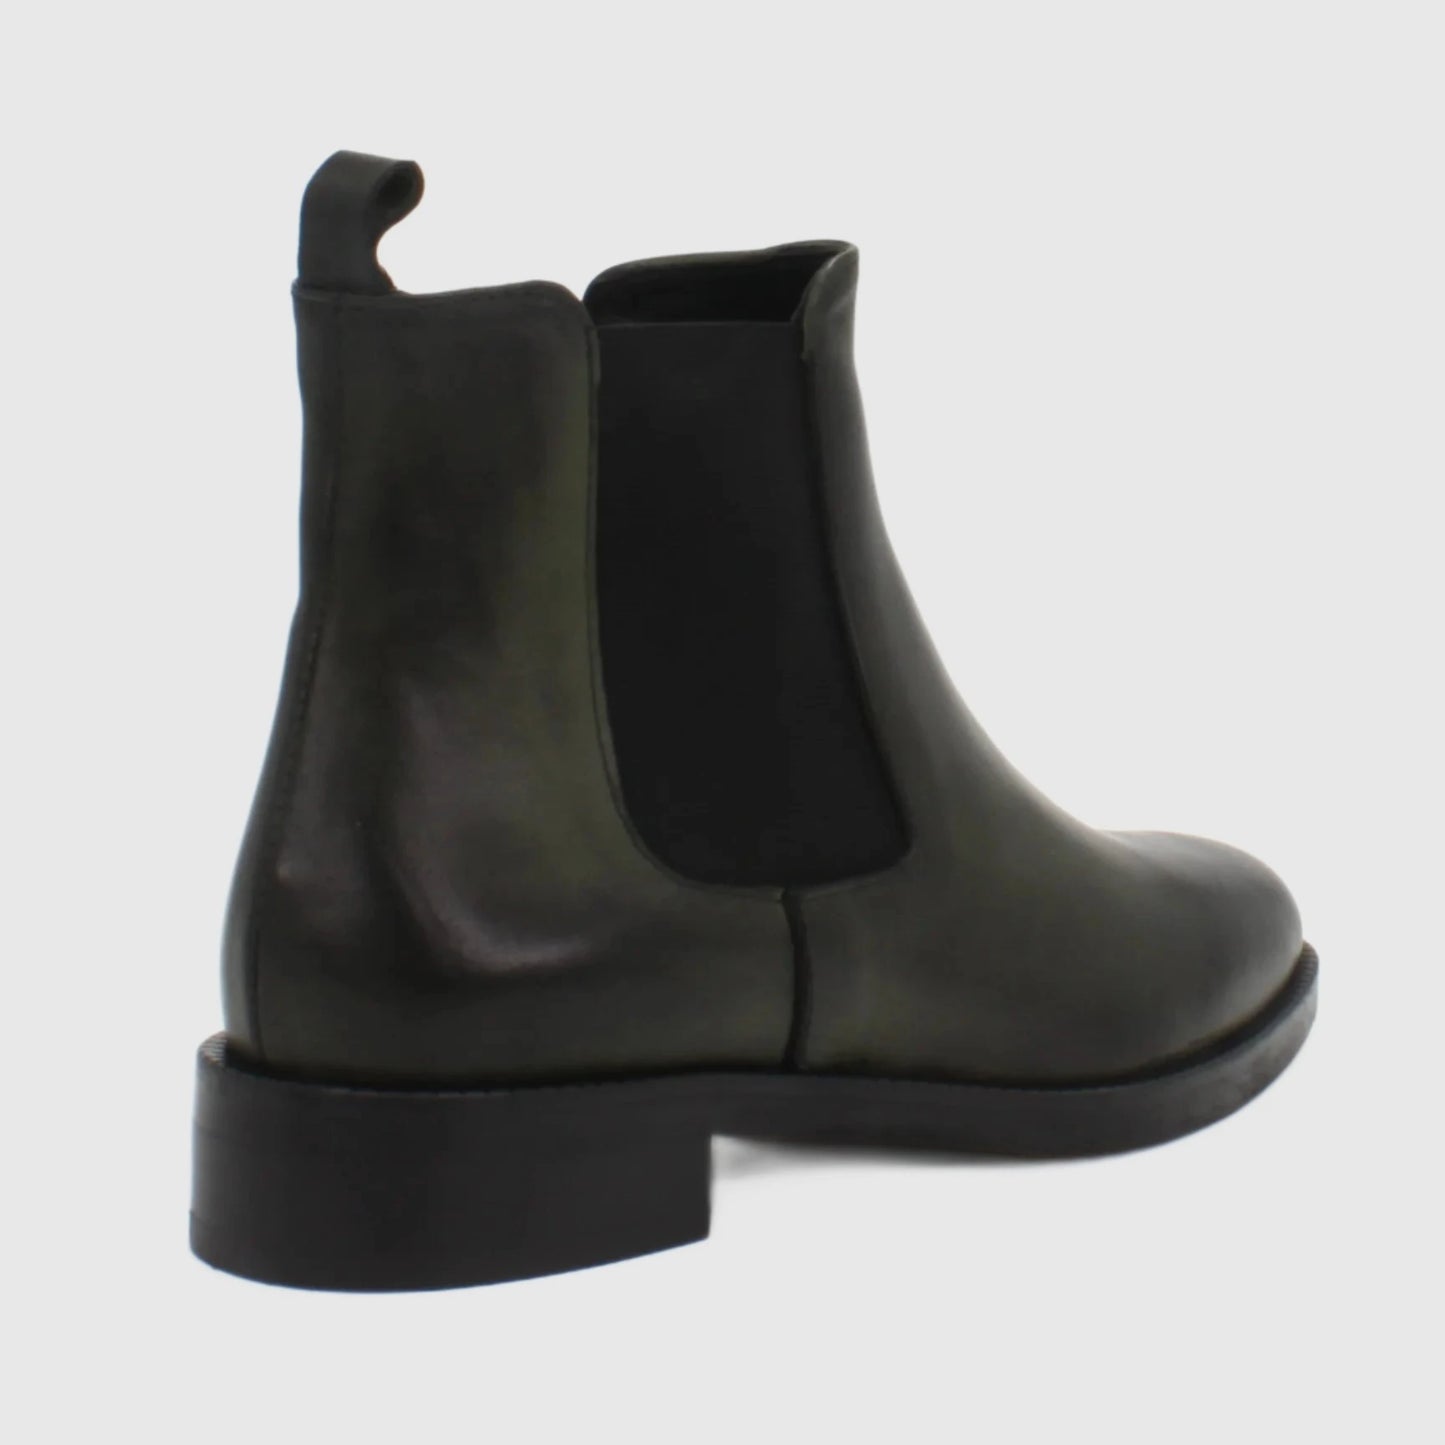 Shop Handmade Italian Leather Boot in Verde (GC2030) or browse our range of hand-made Italian boots for women in leather or suede in-store at Aliverti Cape Town, or shop online. We deliver in South Africa & offer multiple payment plans as well as accept multiple safe & secure payment methods.